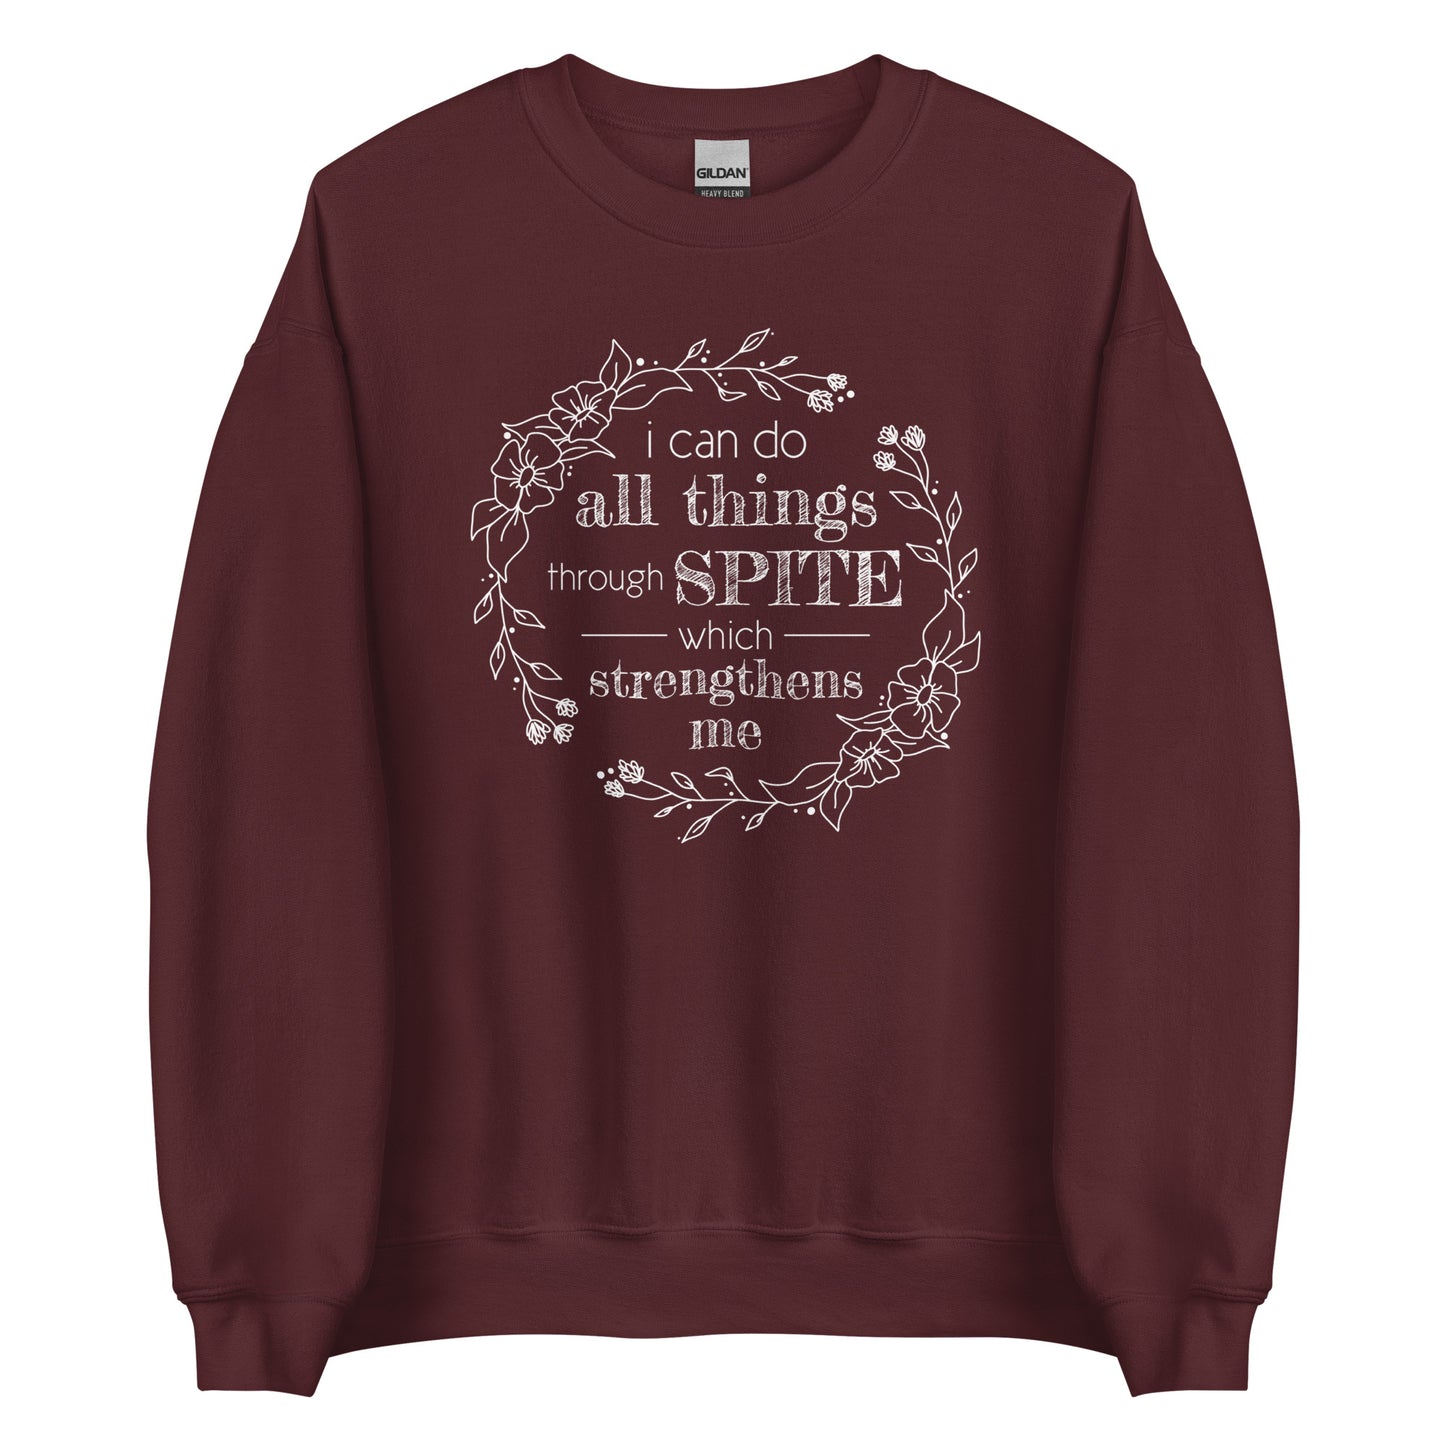 A maroon crewneck sweatshirt featuring an illustration of a floral wreath. Text inside the flowers reads "i can do all things through SPITE which strengthens me"